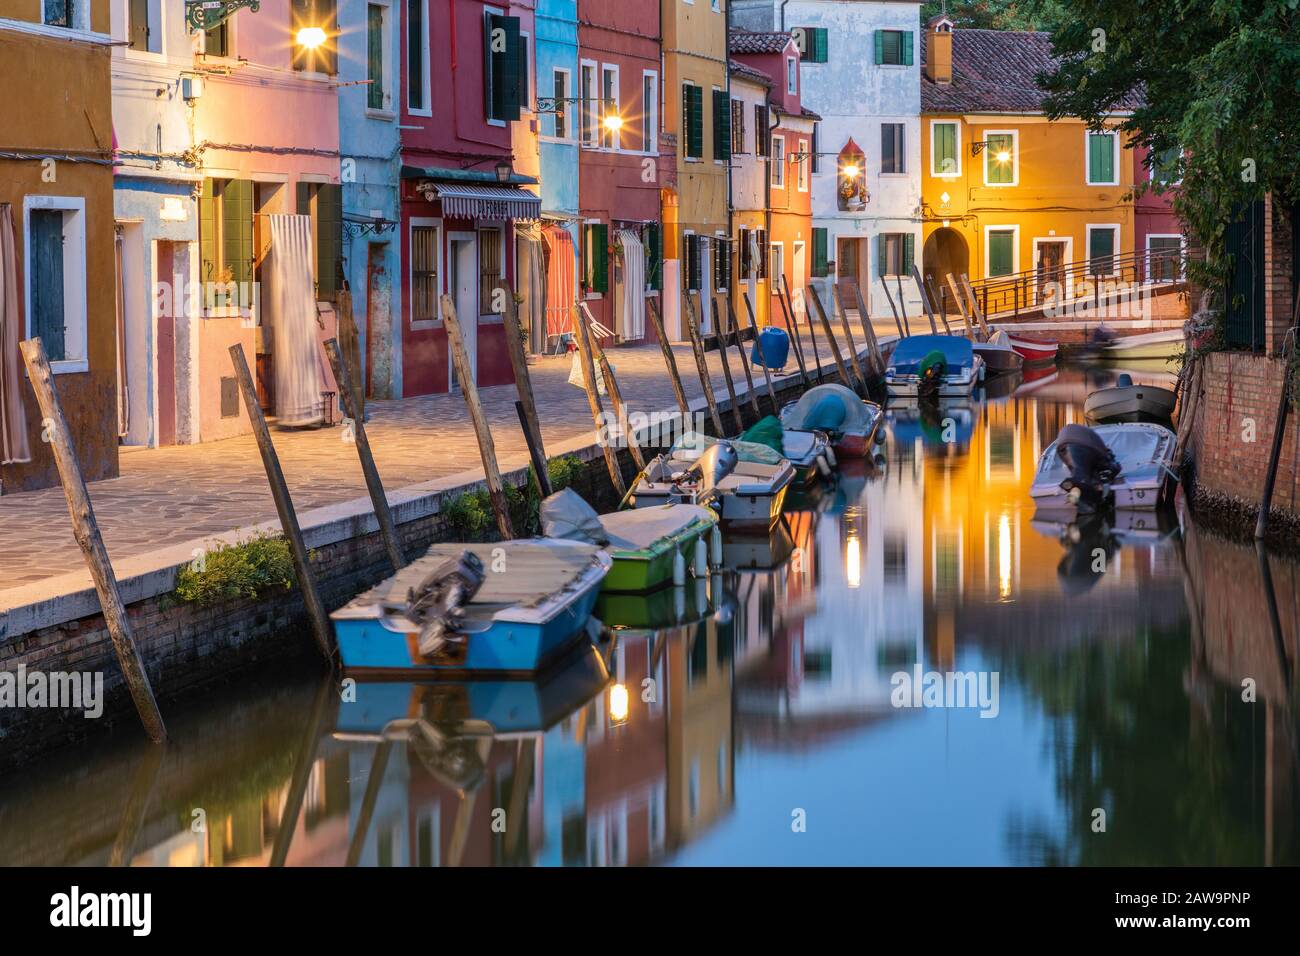 The multicoloured houses of Burano reflected in one of the canals, Burano, Venice, Italy Stock Photo